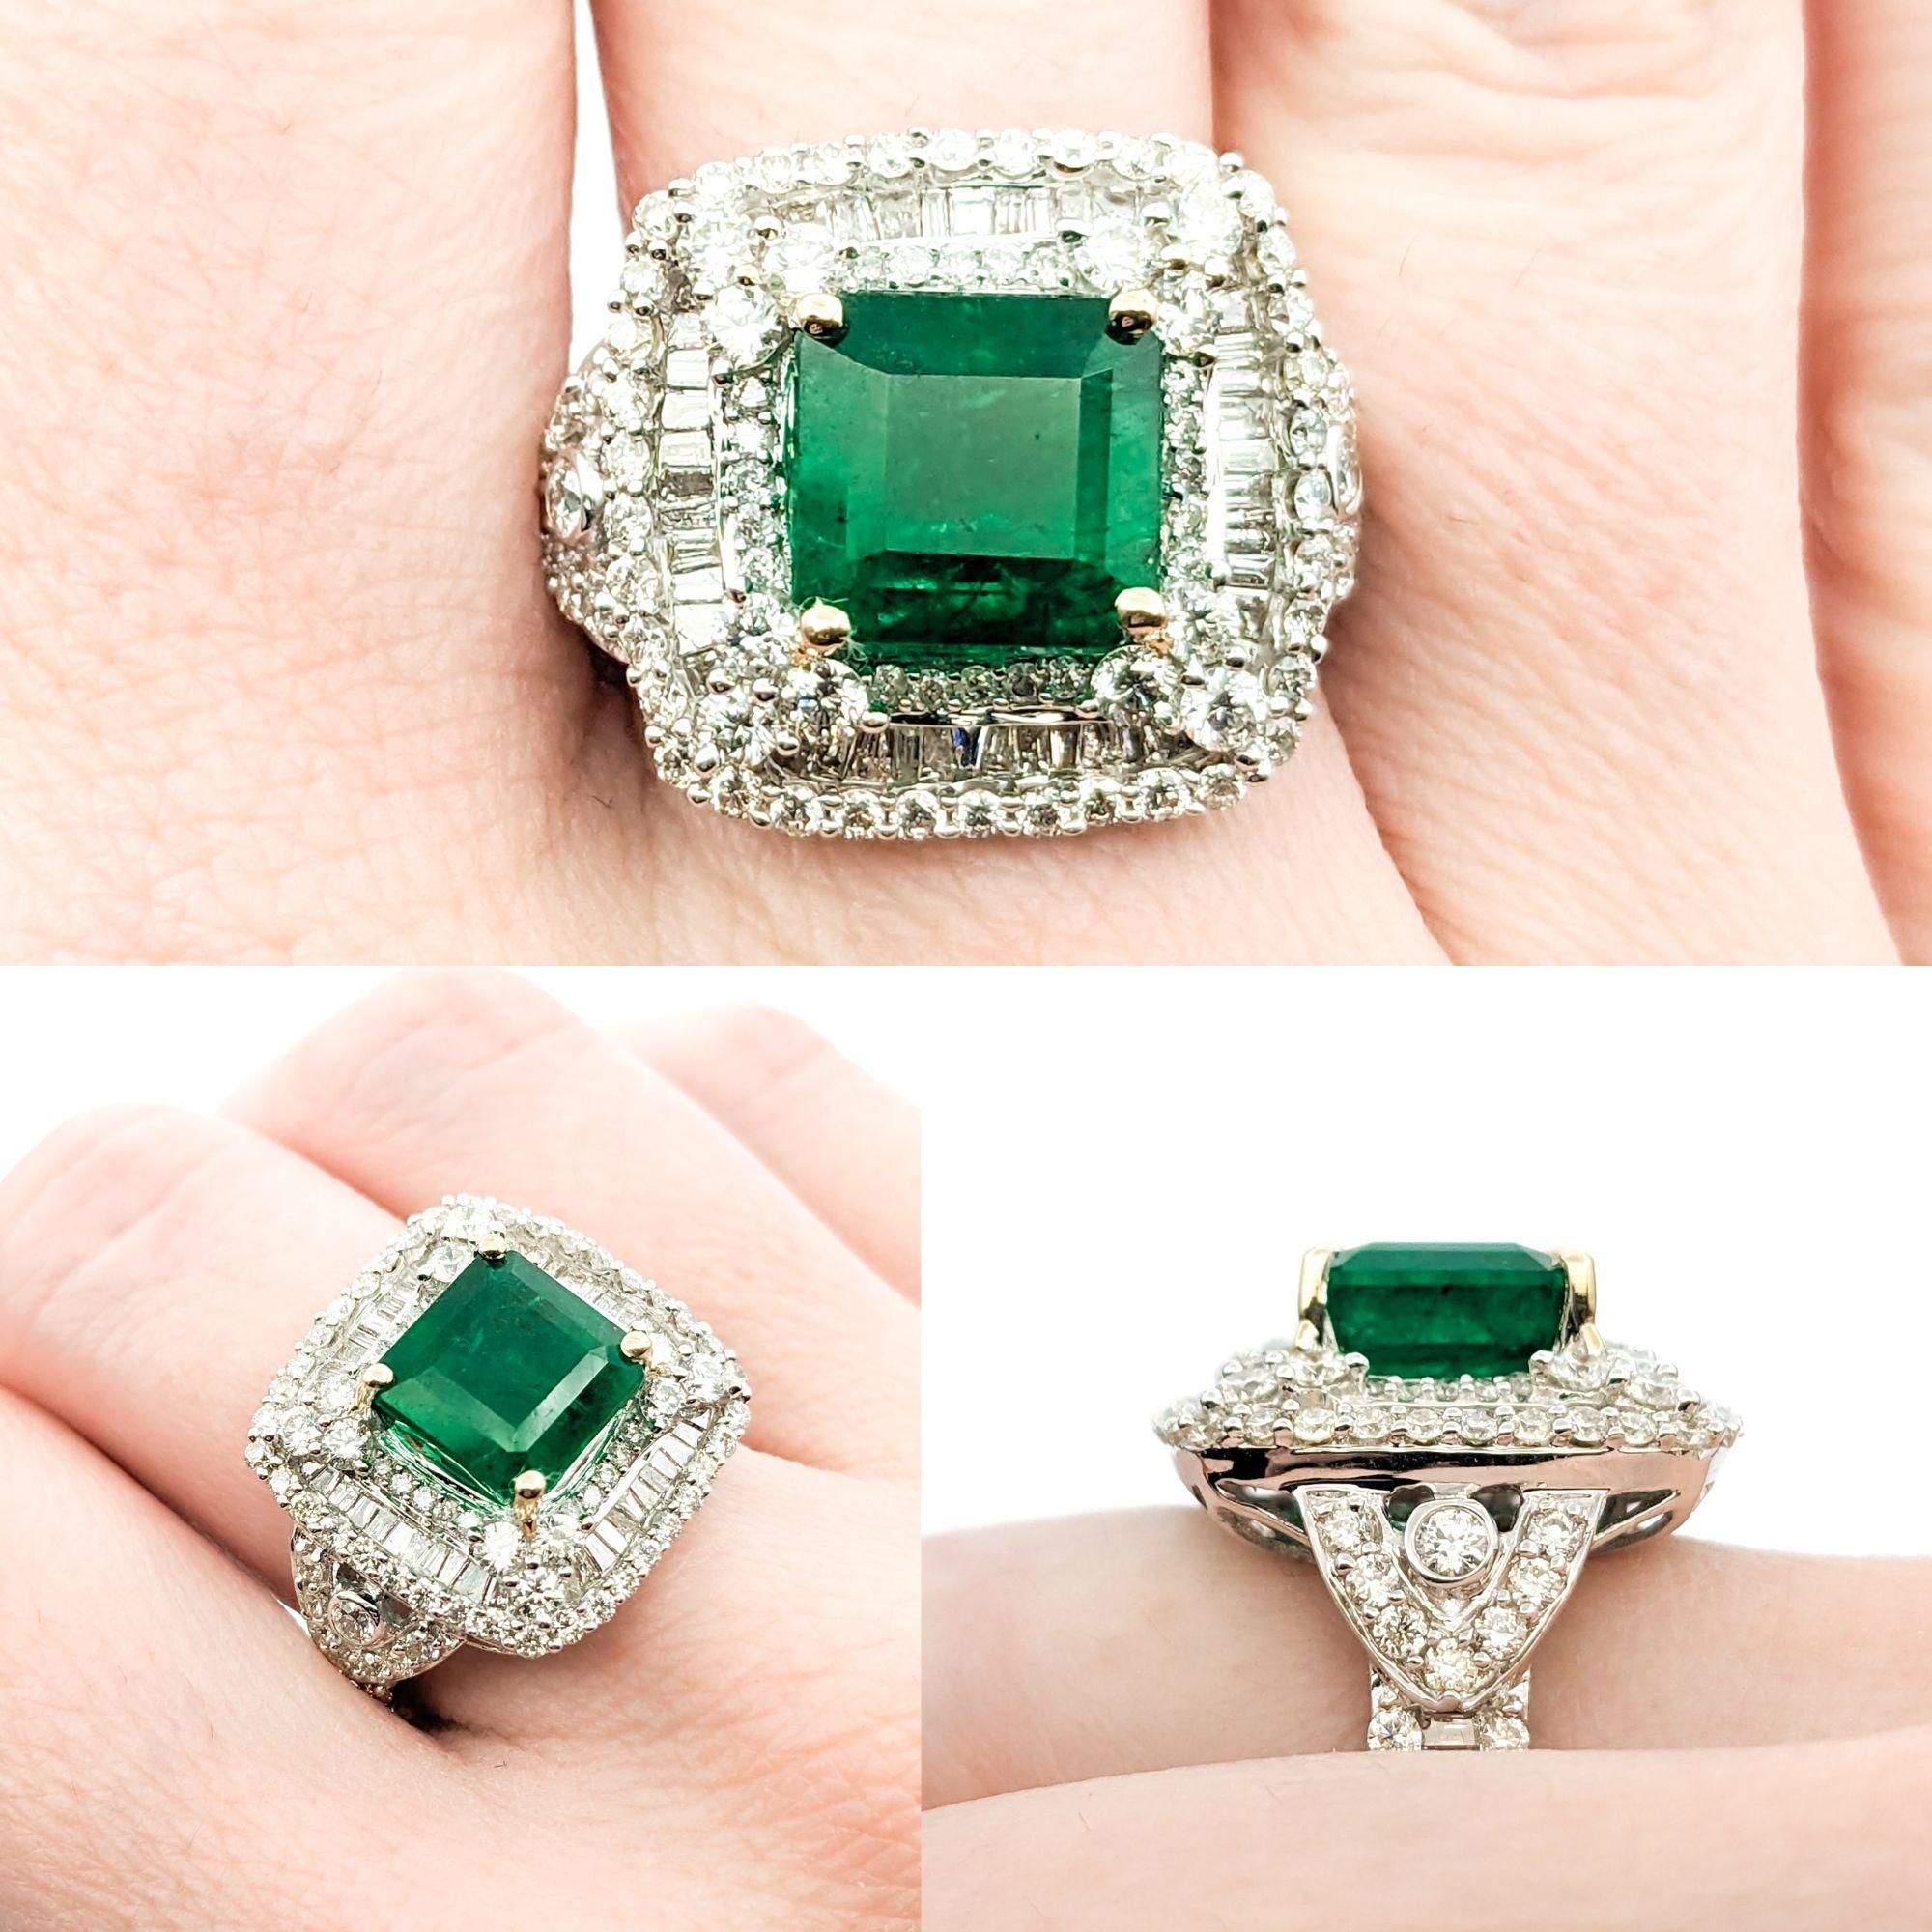 3.84ct Emerald & 2.31ctw Diamond Ring In White Gold

Introducing this exquisite Emerald Ring crafted in 18K White Gold. This ring showcases a stunning 3.84ct Emerald centerpiece, renowned for its deep, rich green hue and captivating beauty. This